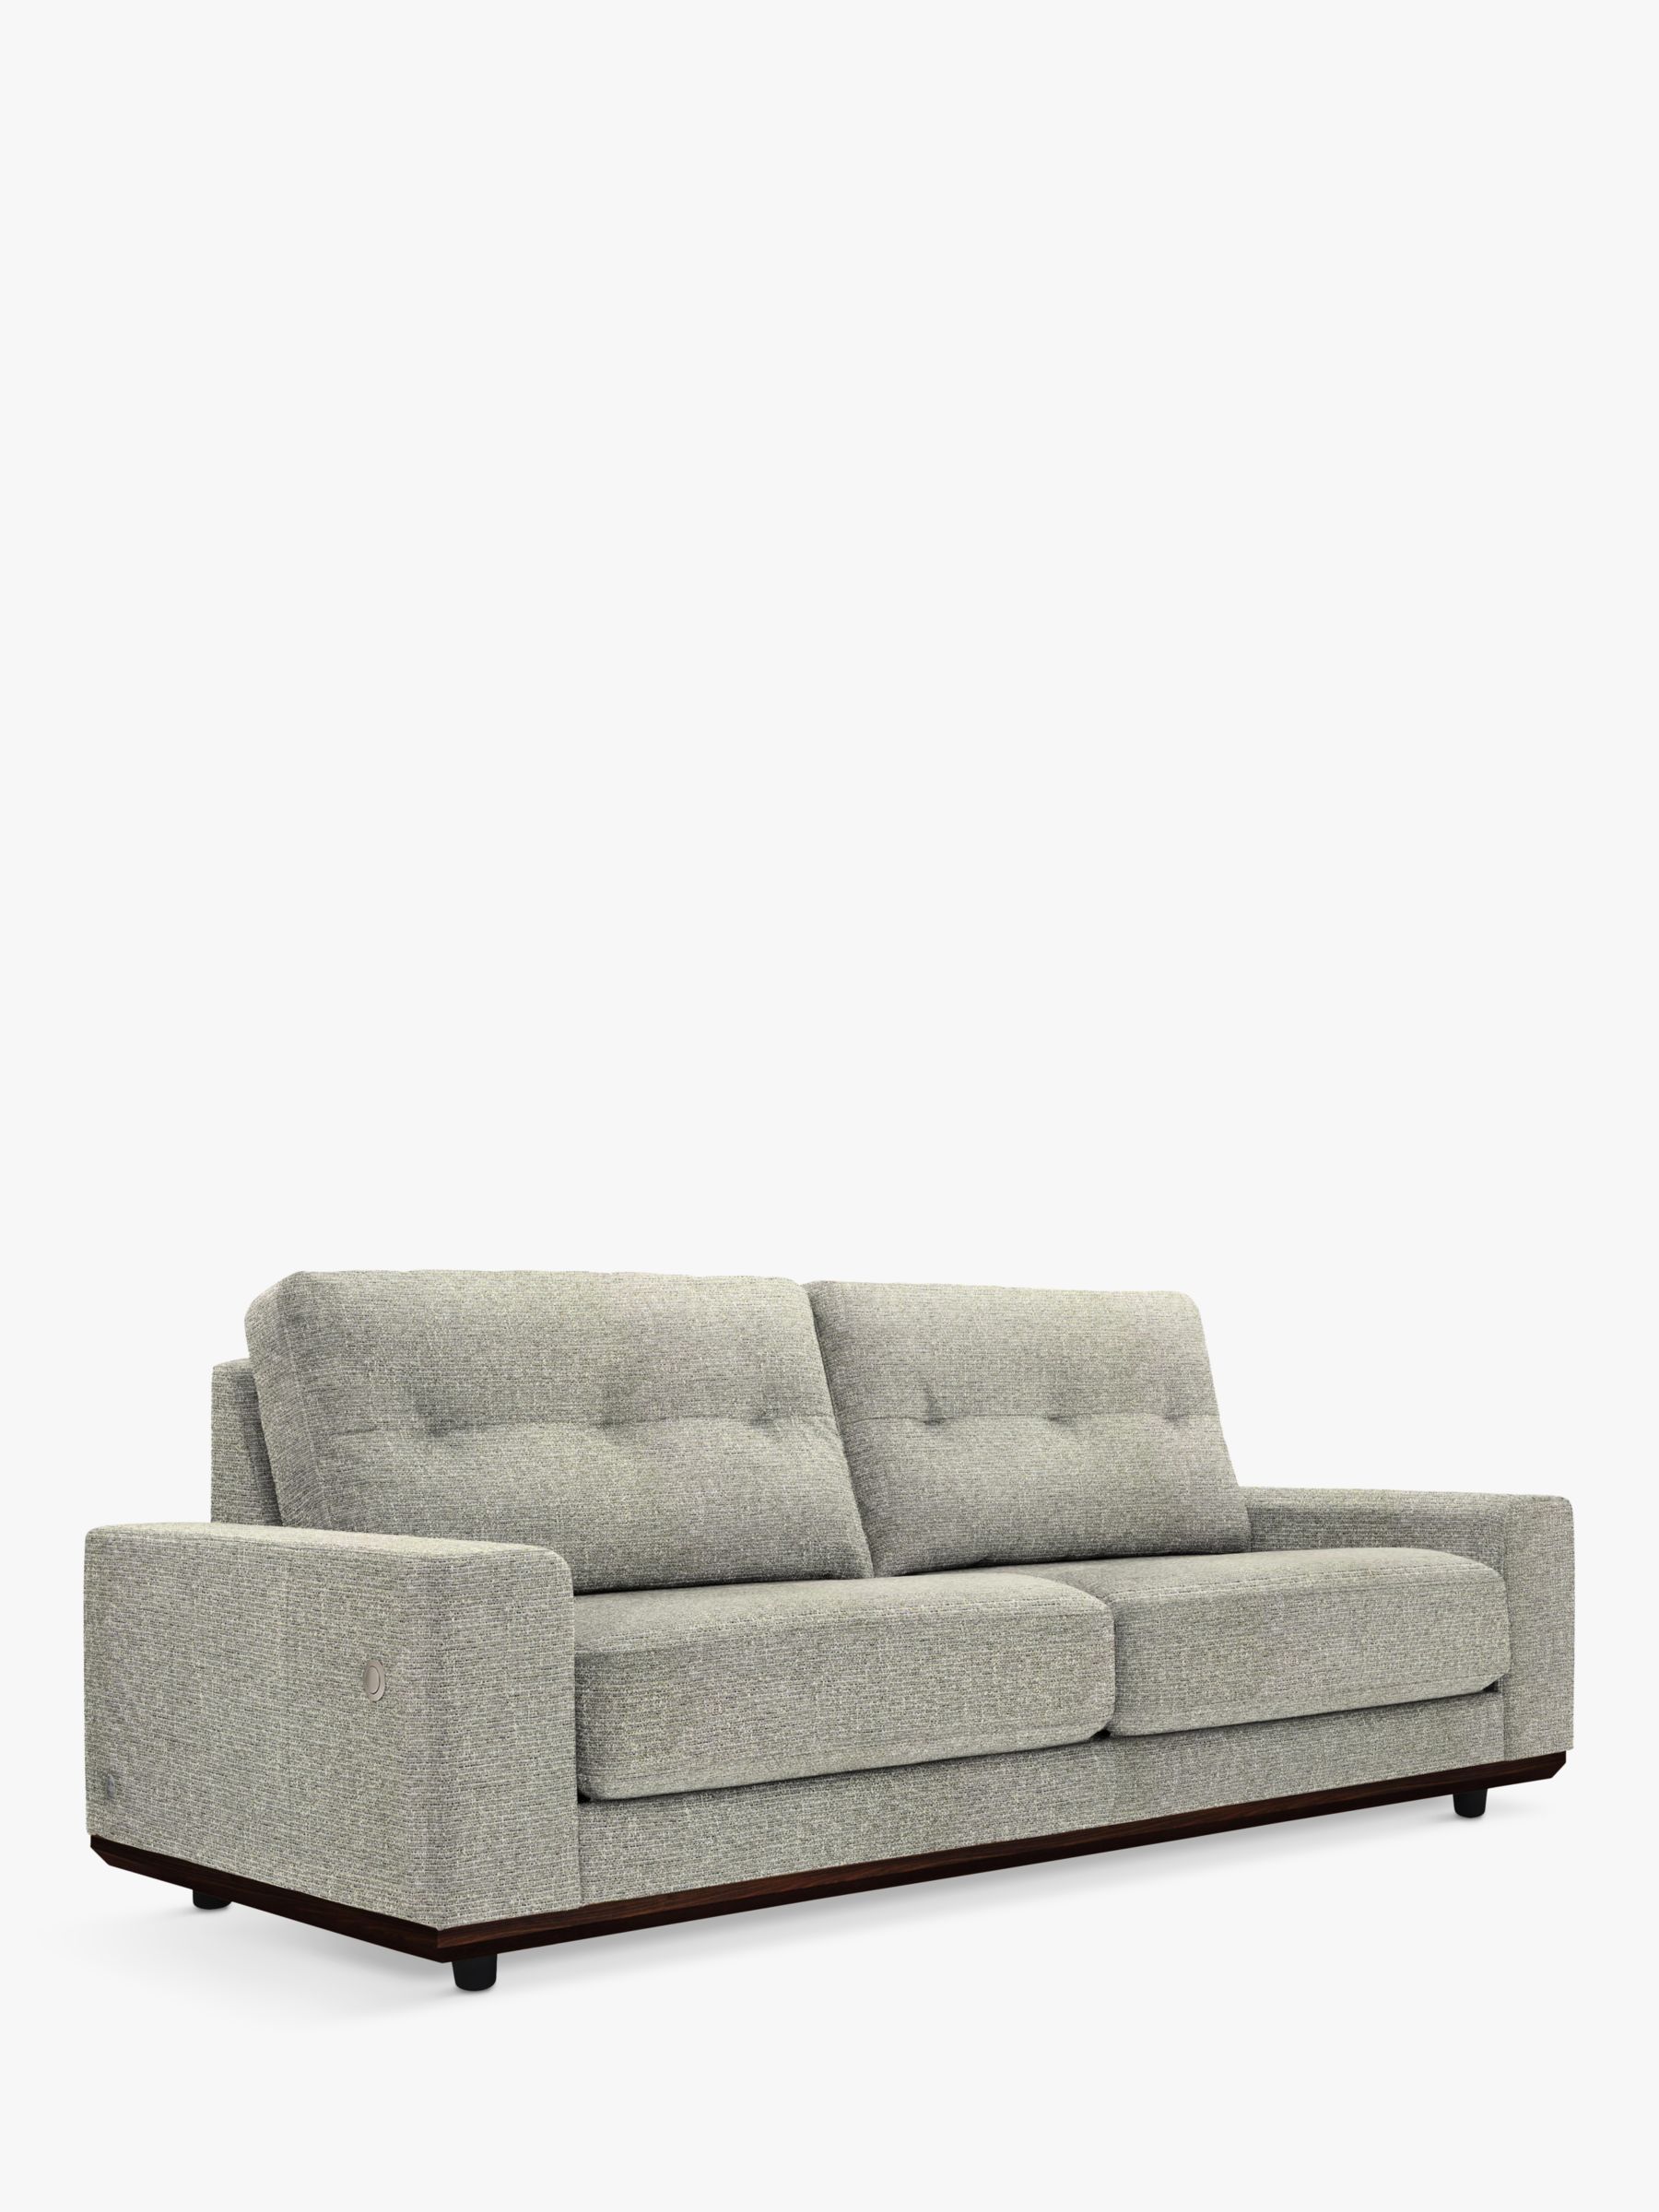 G Plan Vintage The Seventy One with USB Charging Port Large 3 Seater Sofa